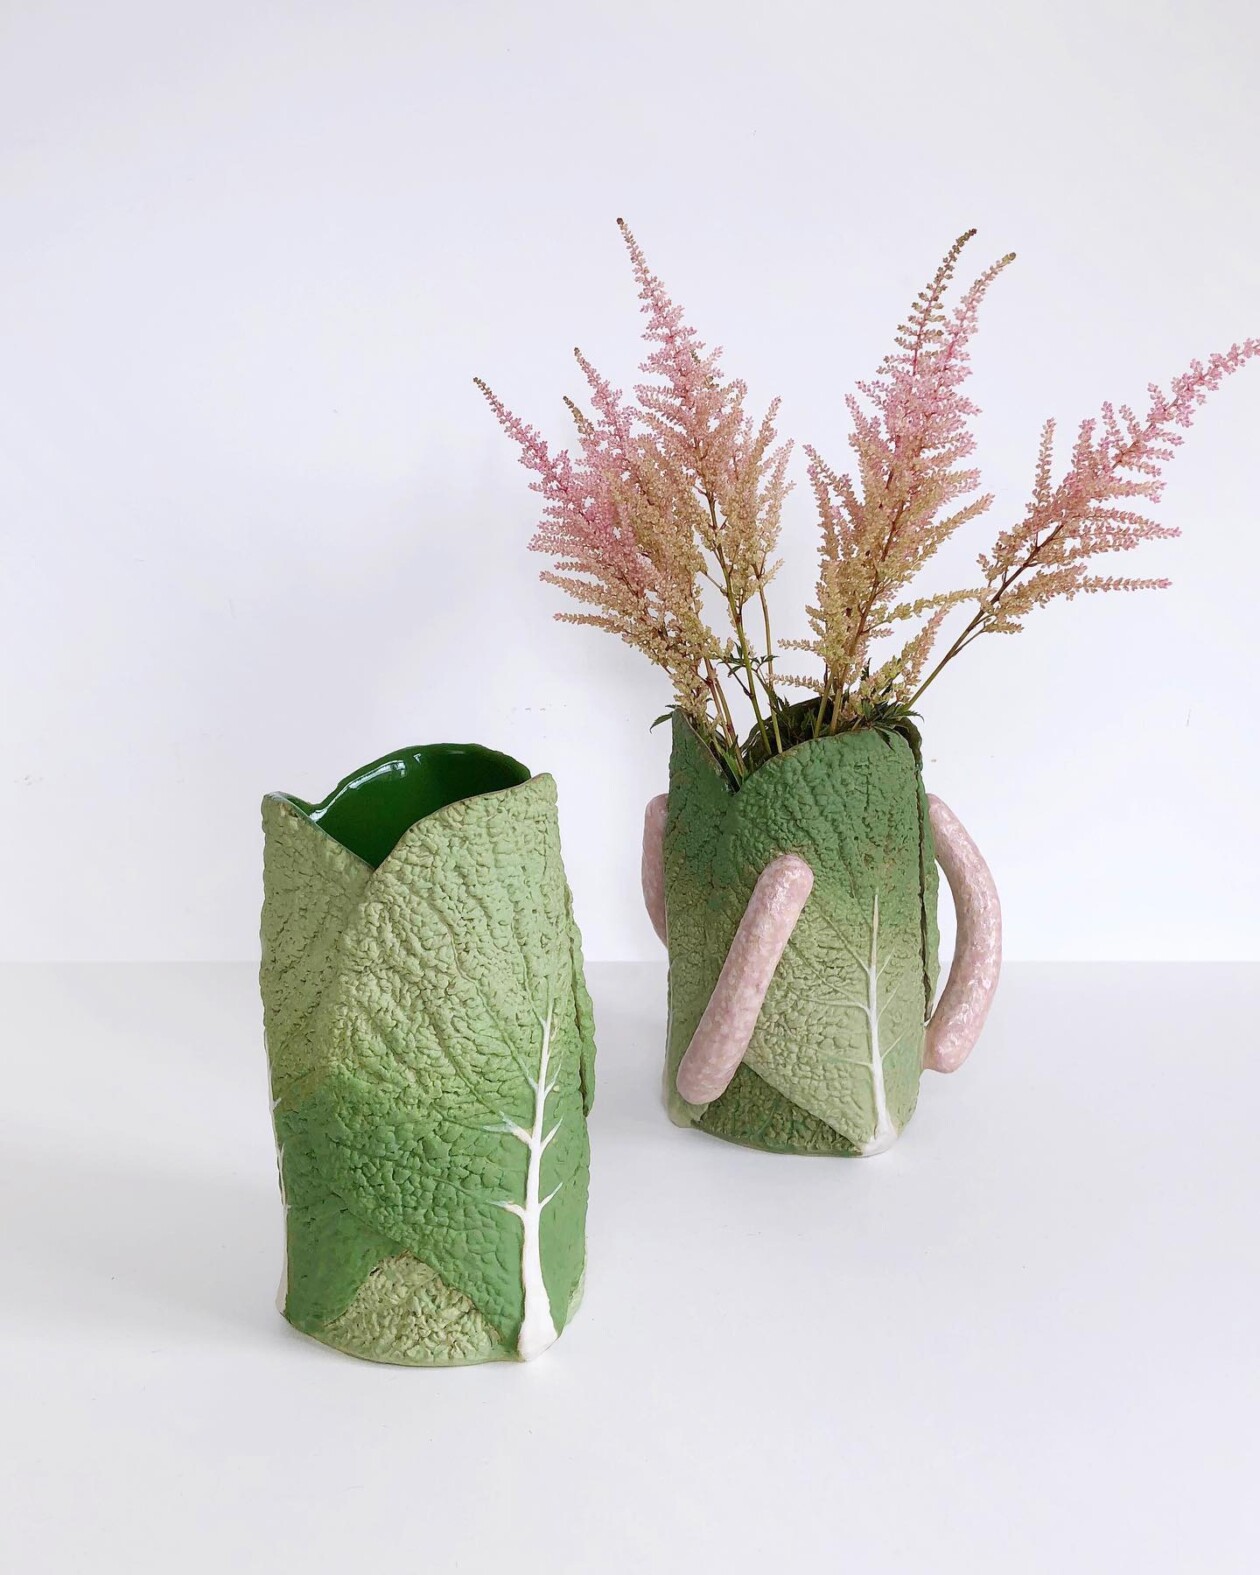 Food Based Ceramic Sculptures By Eléonore Joulin (4)